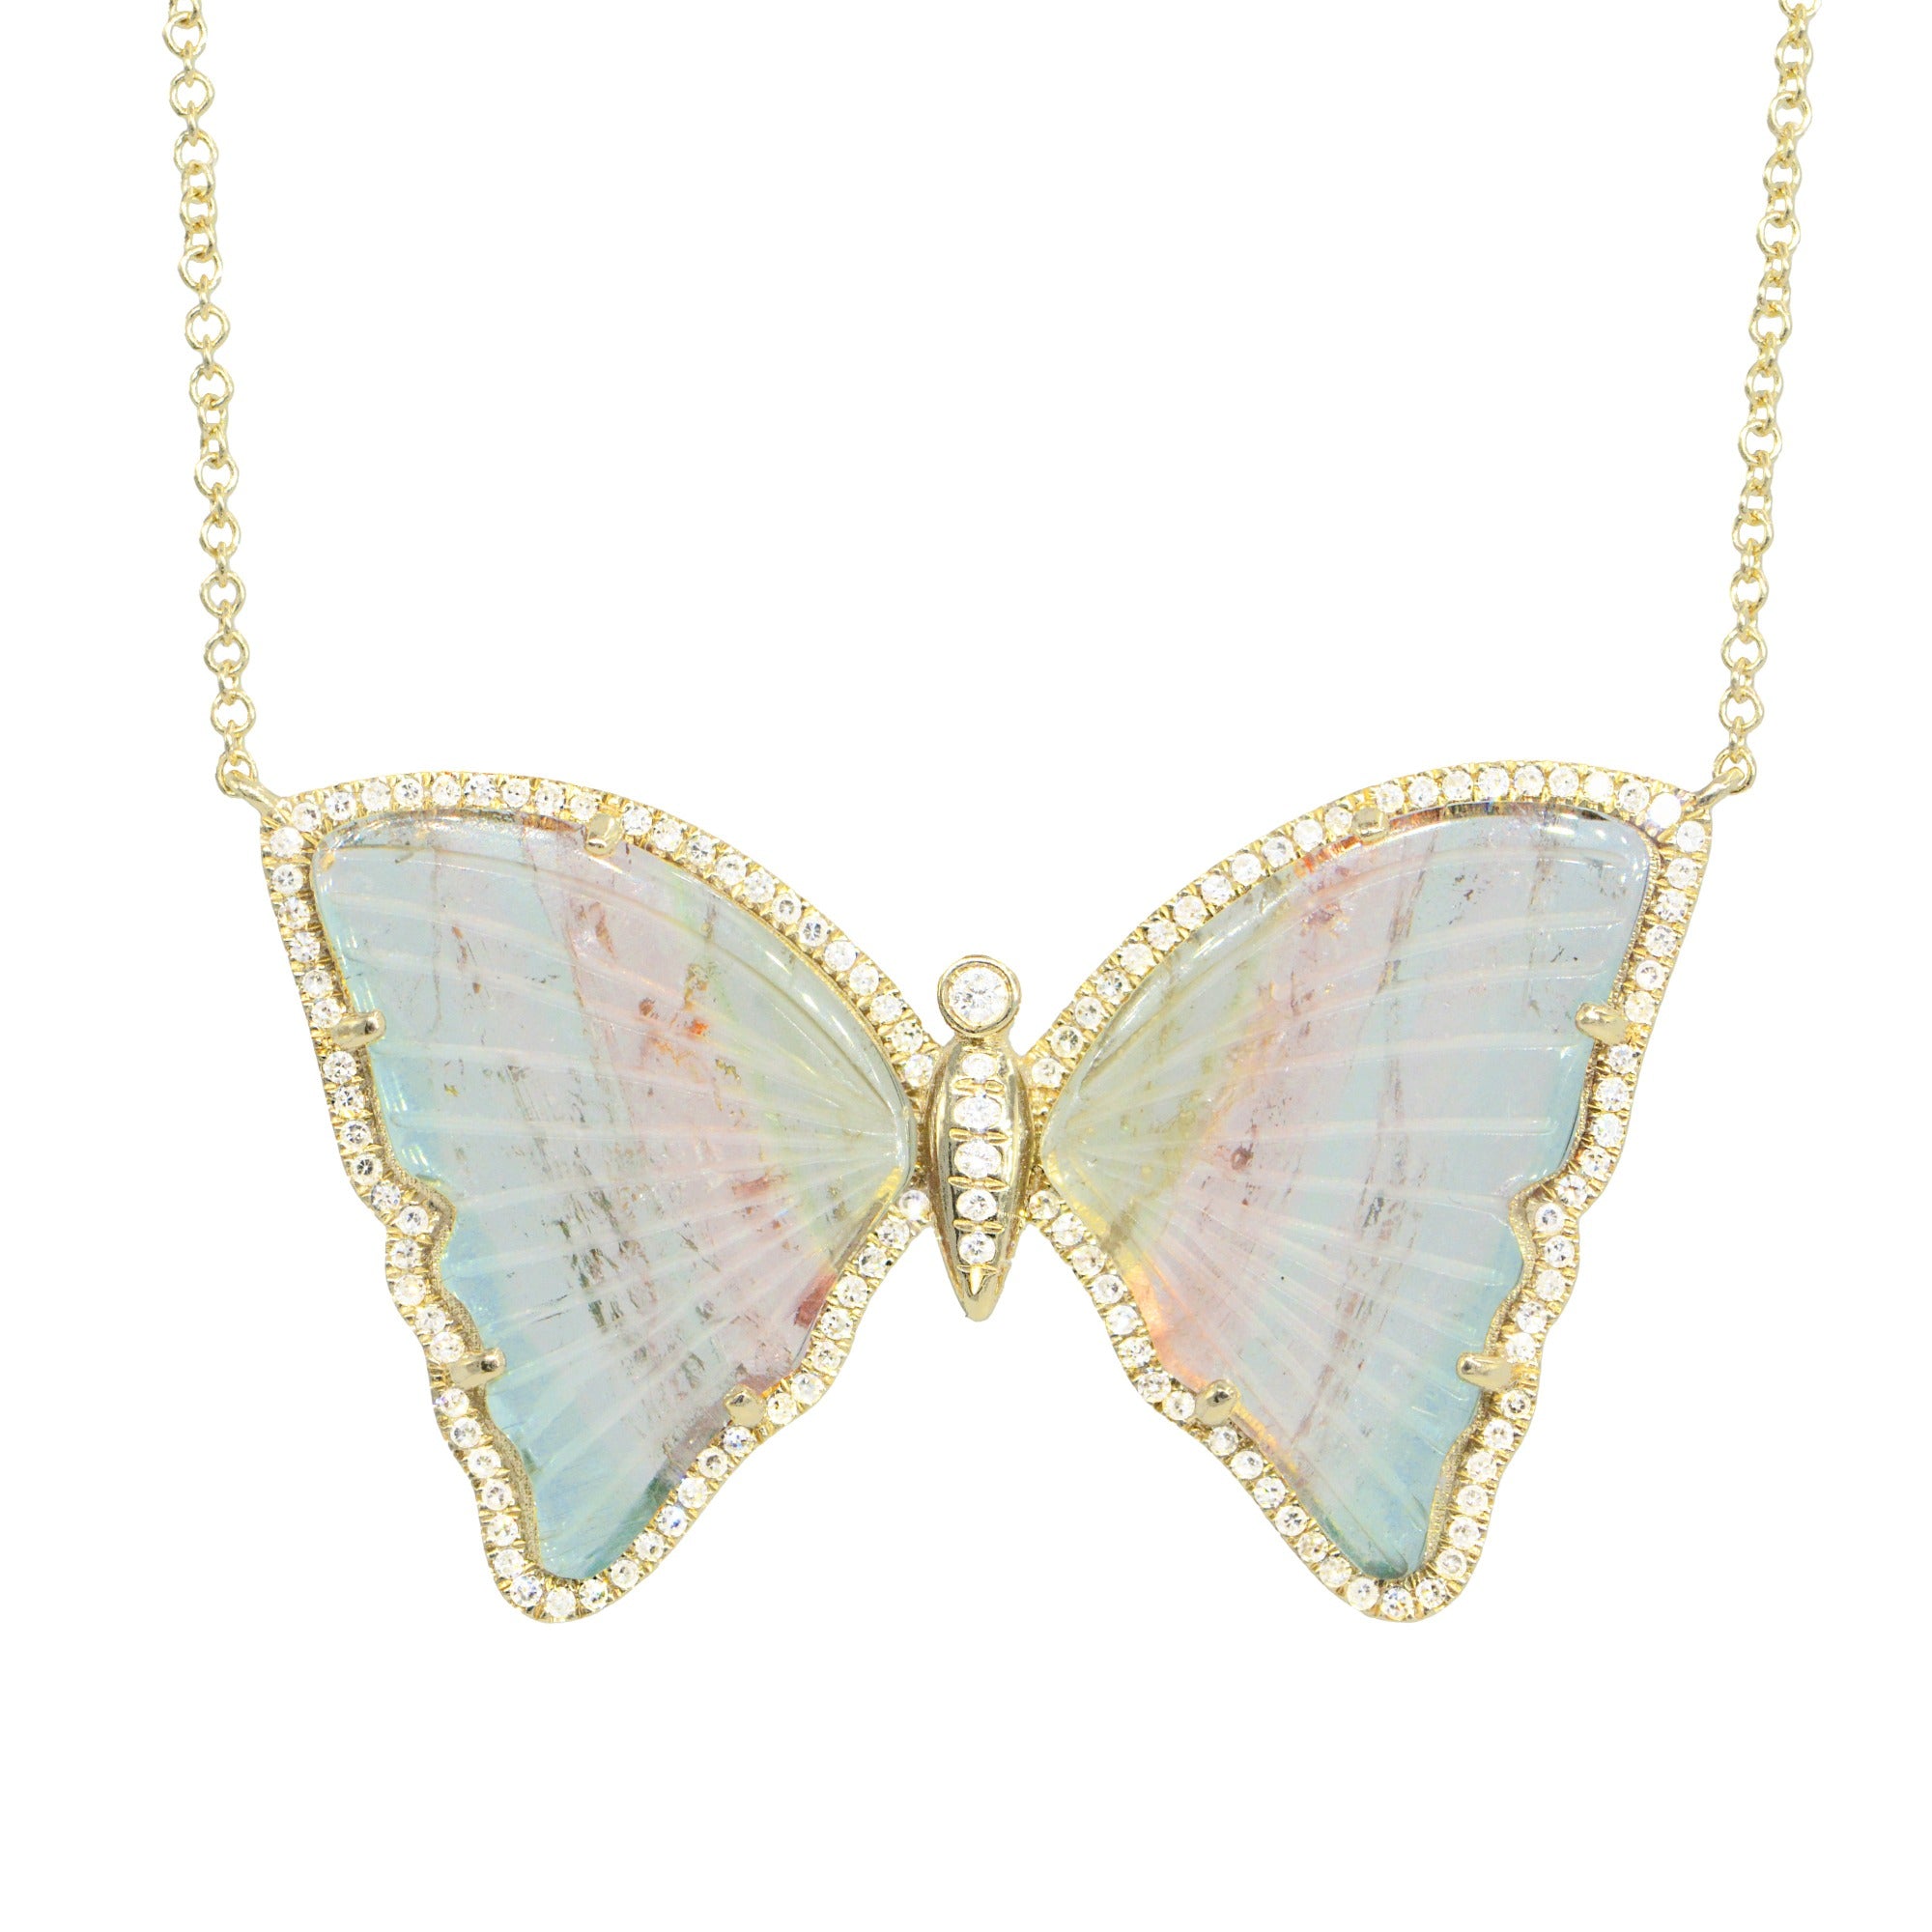 Large Mauve Multi-colored Pastel Tourmaline Butterfly Necklace with Diamonds